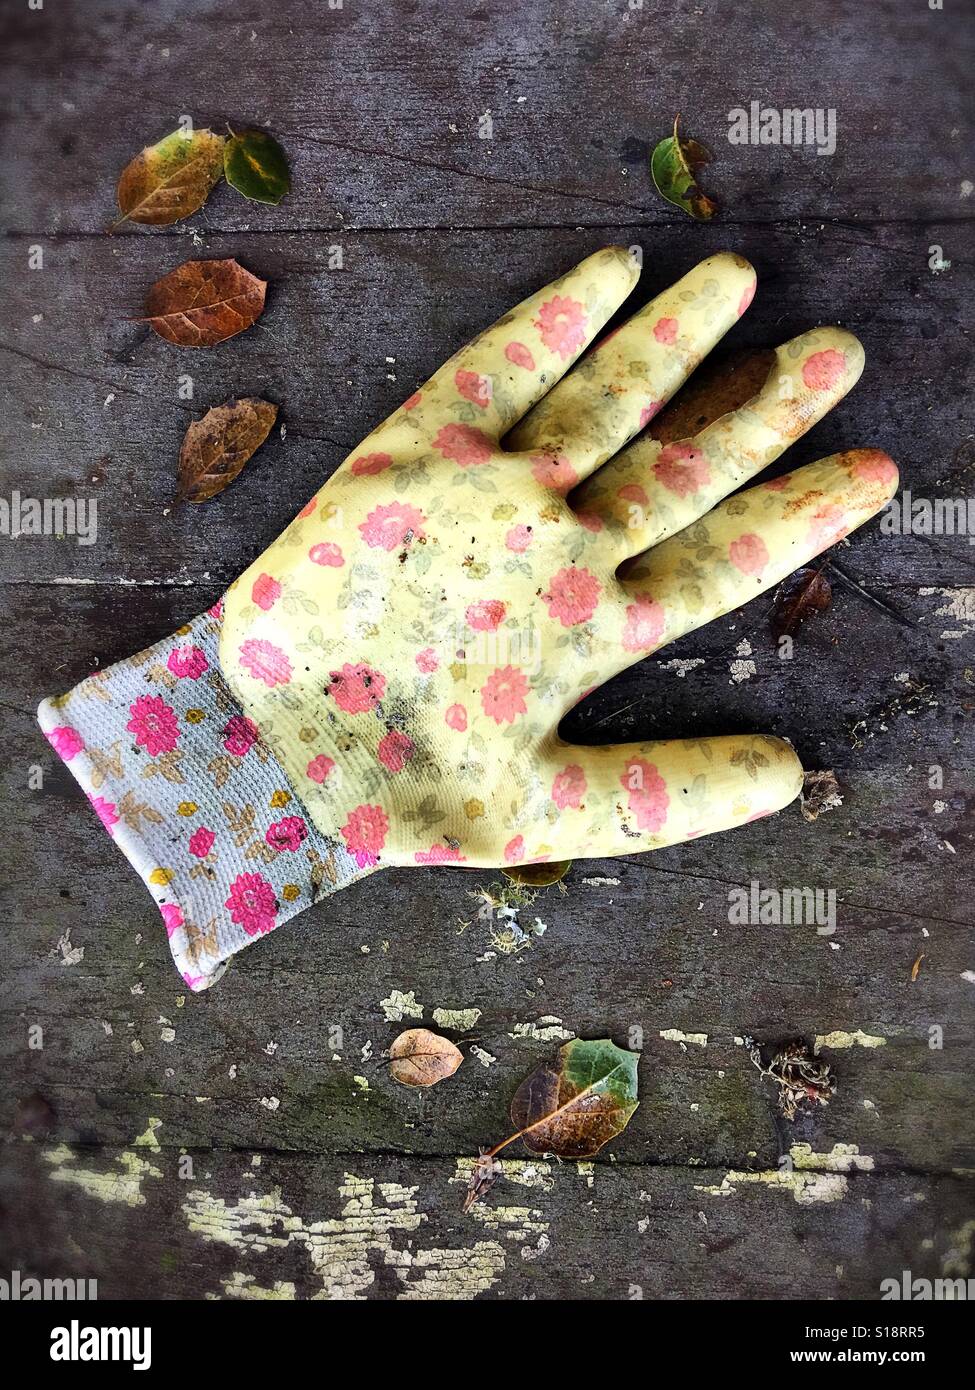 A yellow floral gardening glove left out on rustic wood surrounded by leaves and twigs. Stock Photo